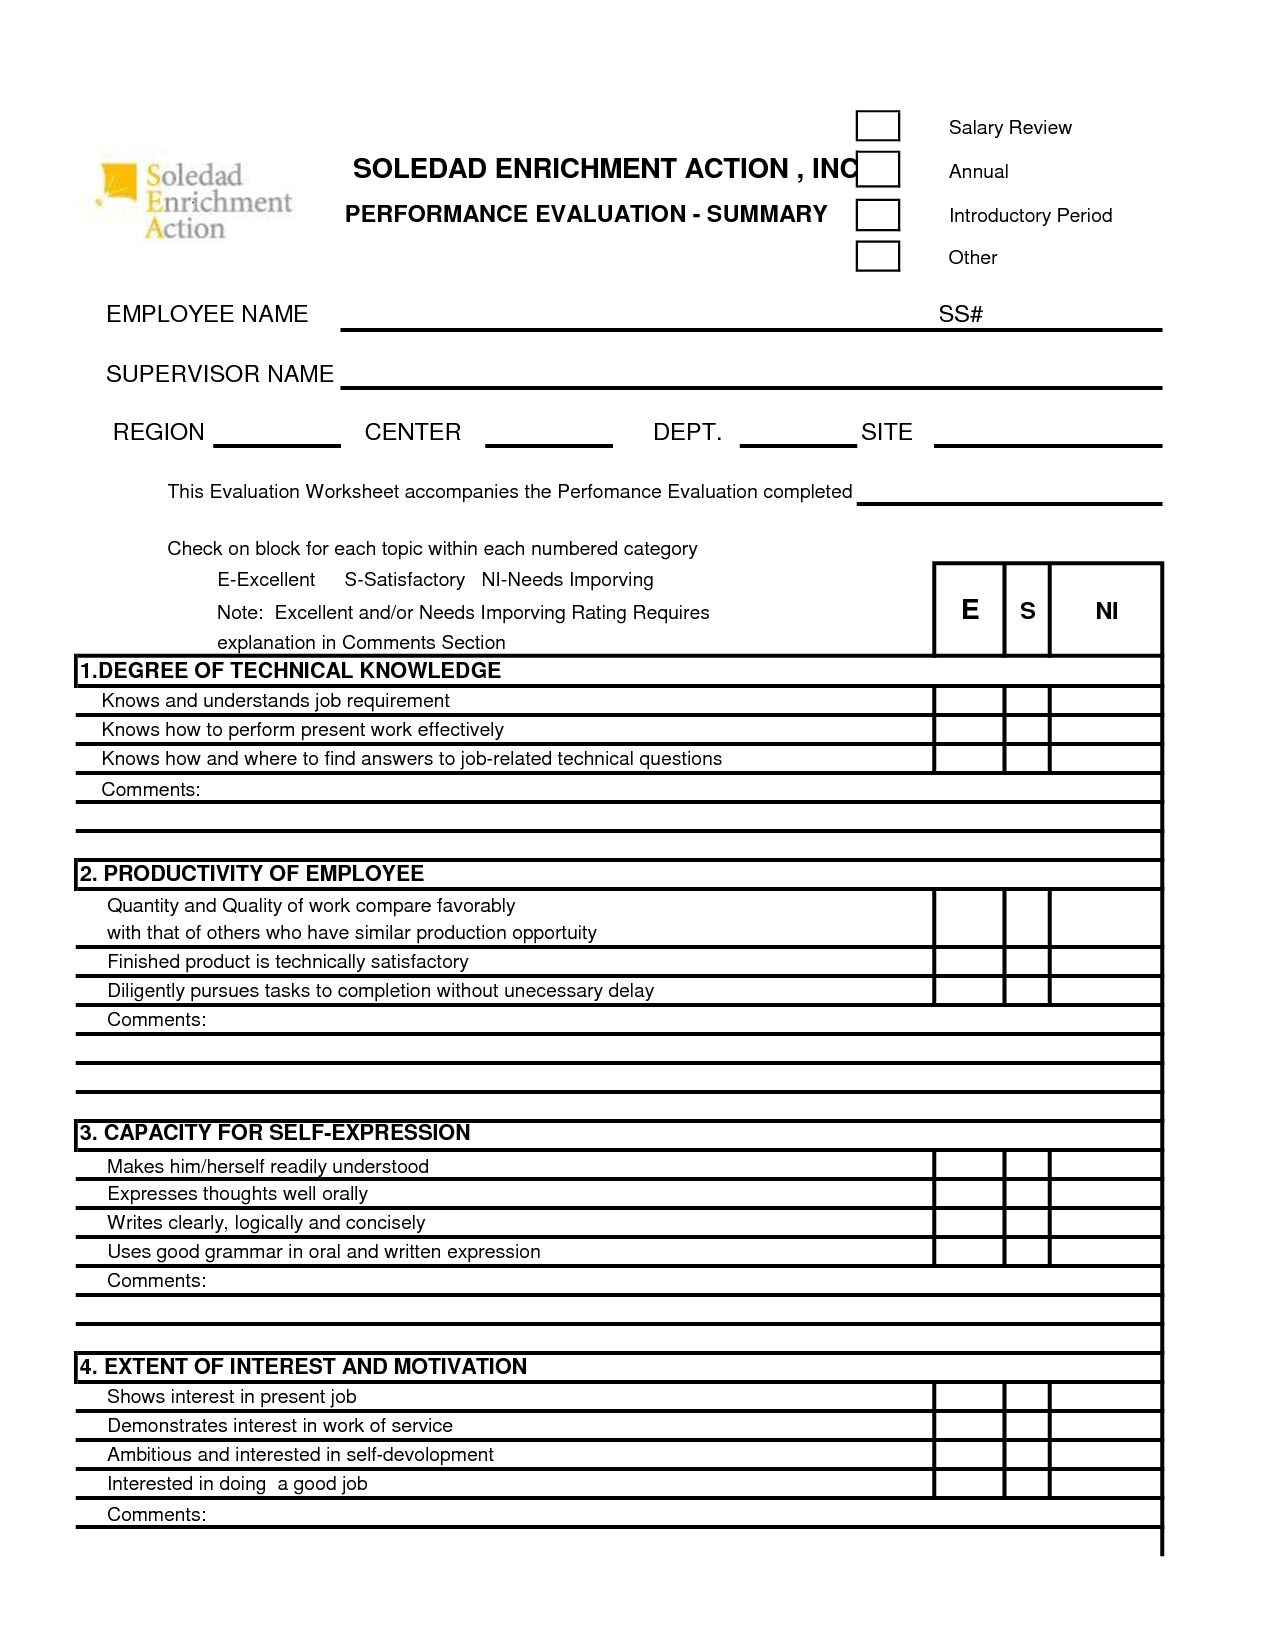 Free 360 Performance Appraisal Form Google Search Performance